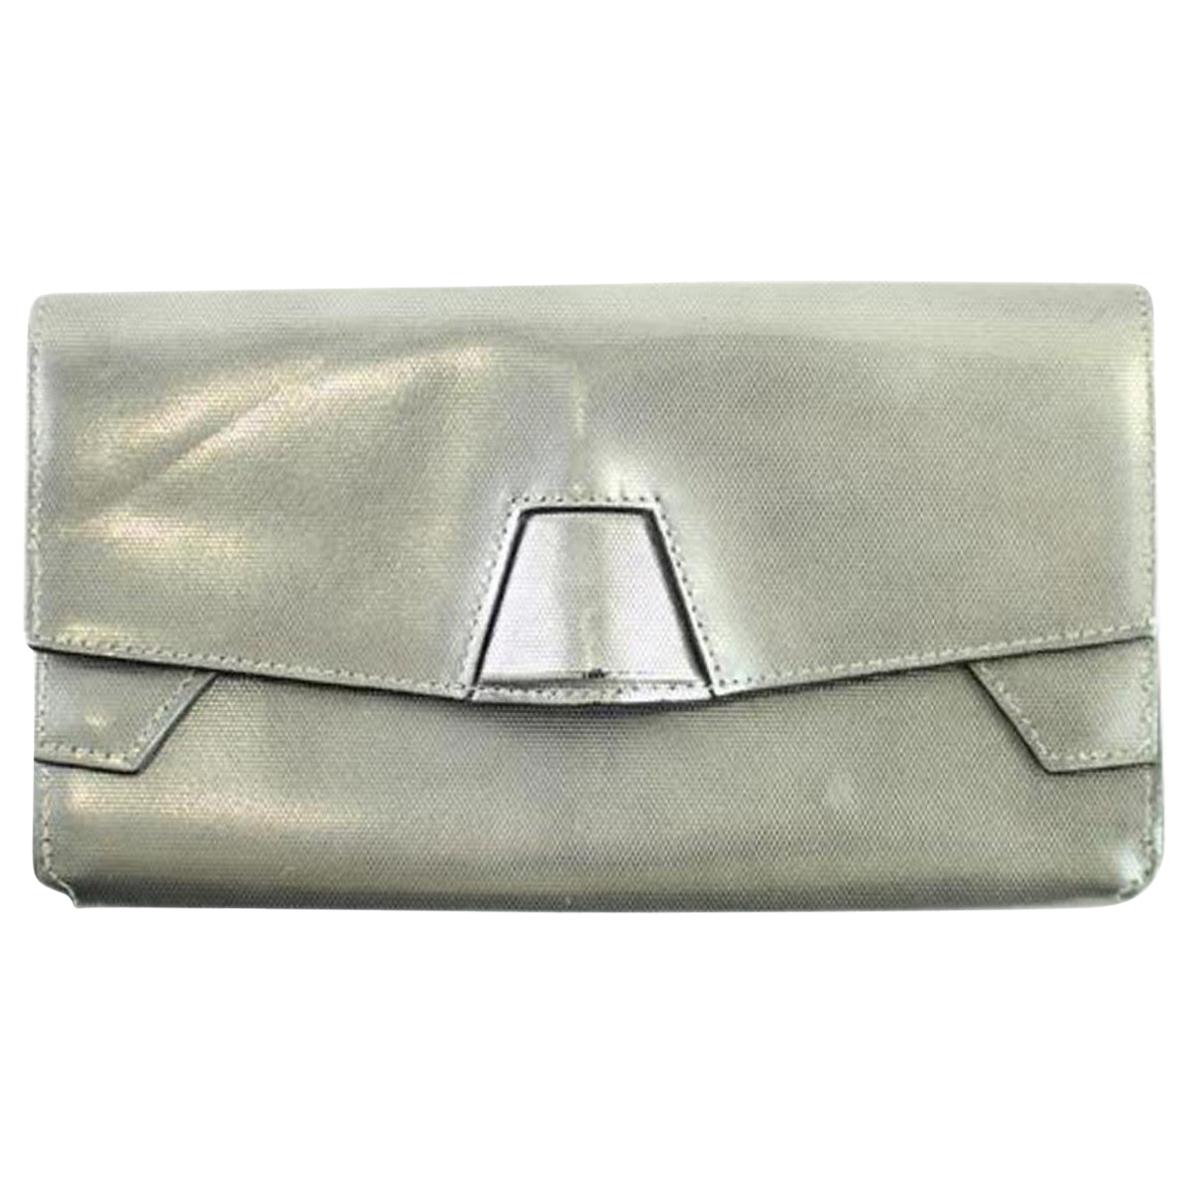 Alexander Wang Quillion Lydia 91misa3117 Silver Clutch For Sale